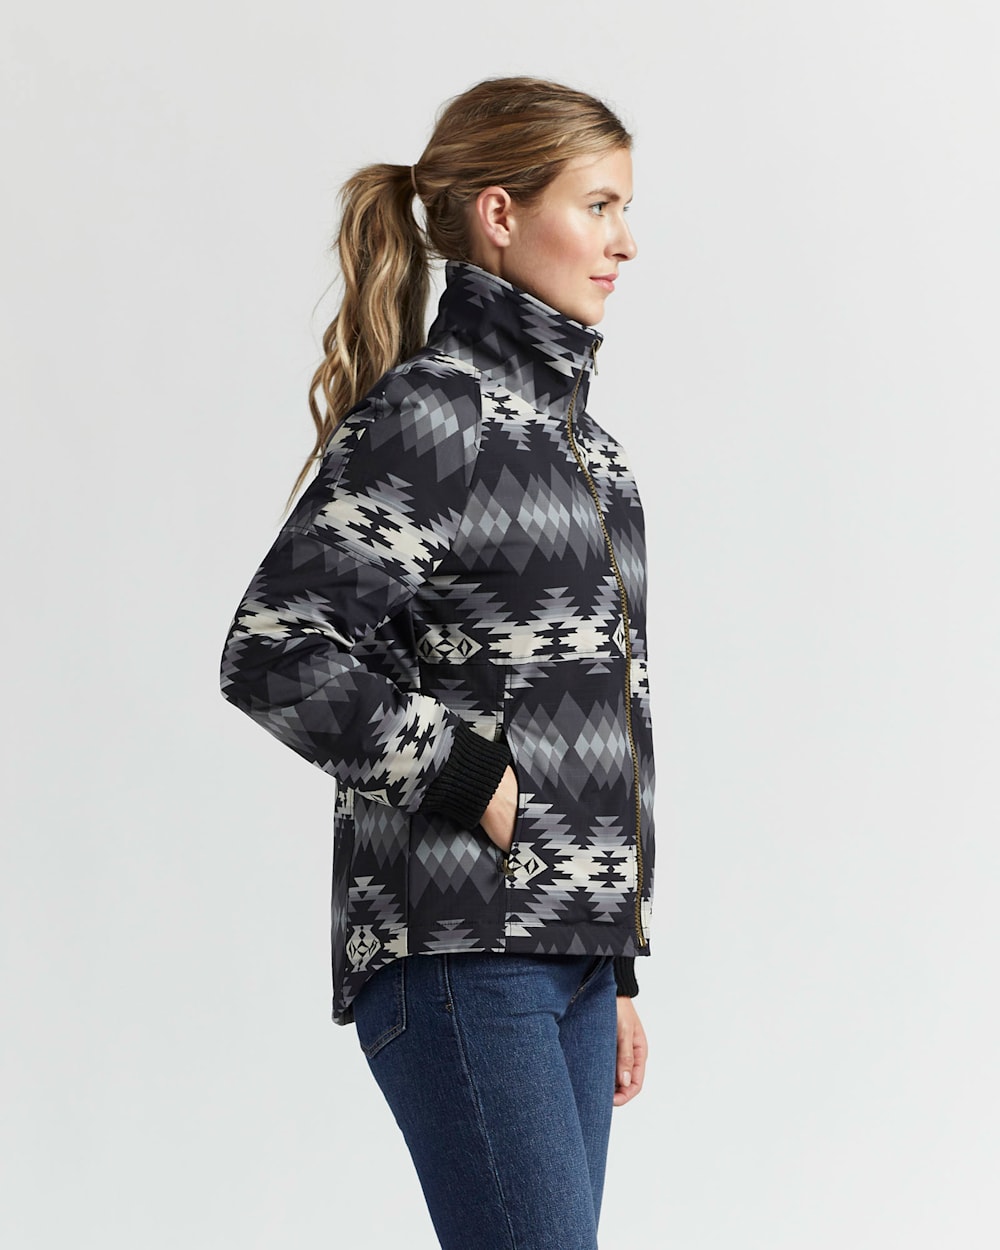 ALTERNATE VIEW OF WOMEN'S ALAMOSA INSULATED RIPSTOP JACKET IN BLACK/PAPAGO image number 2